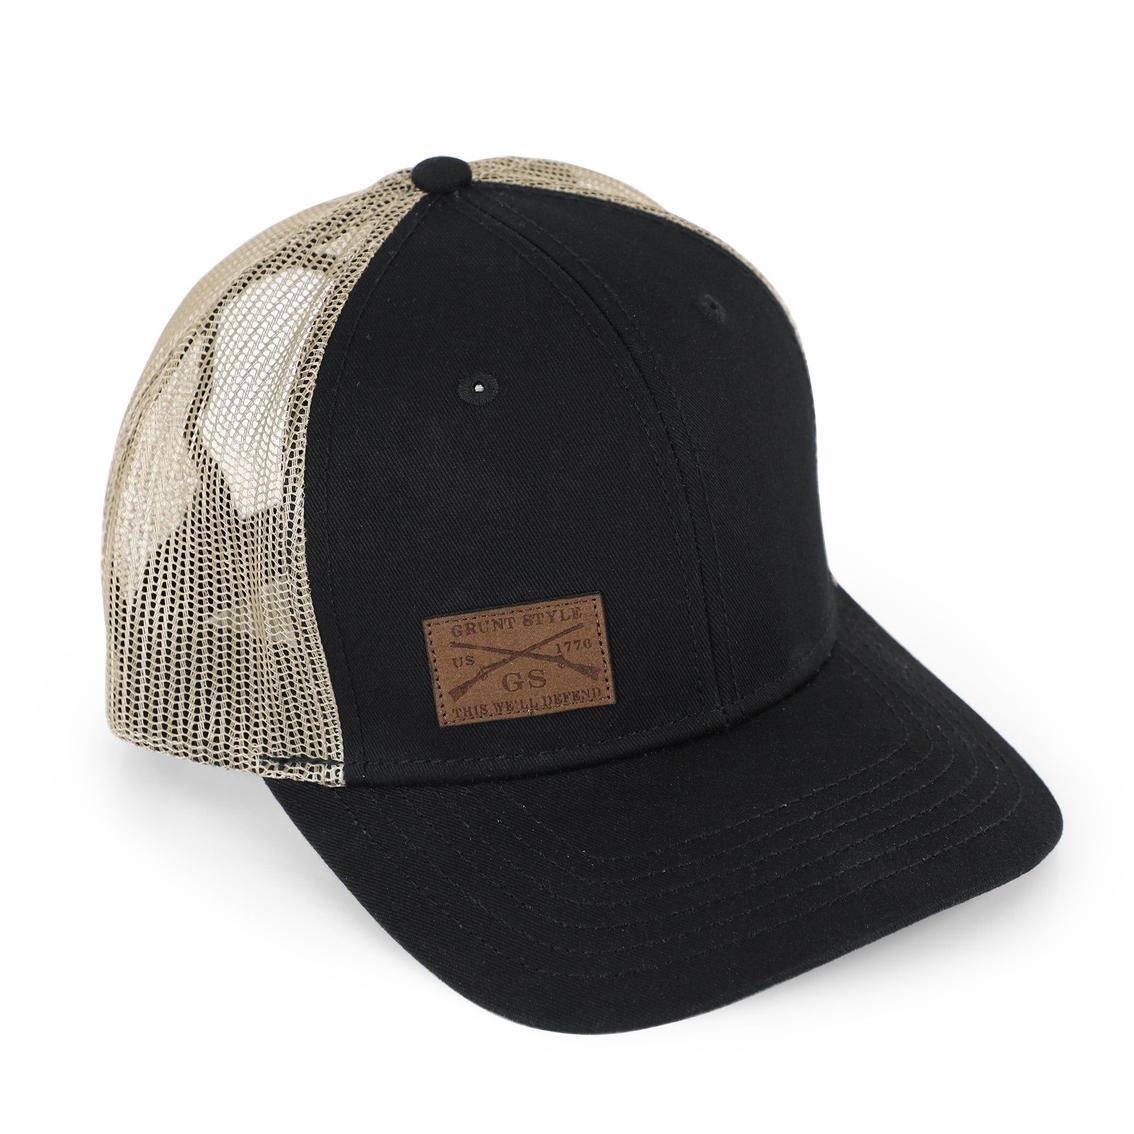 Grunt Style Logo Leather Patch Hat - Image 2 of 2